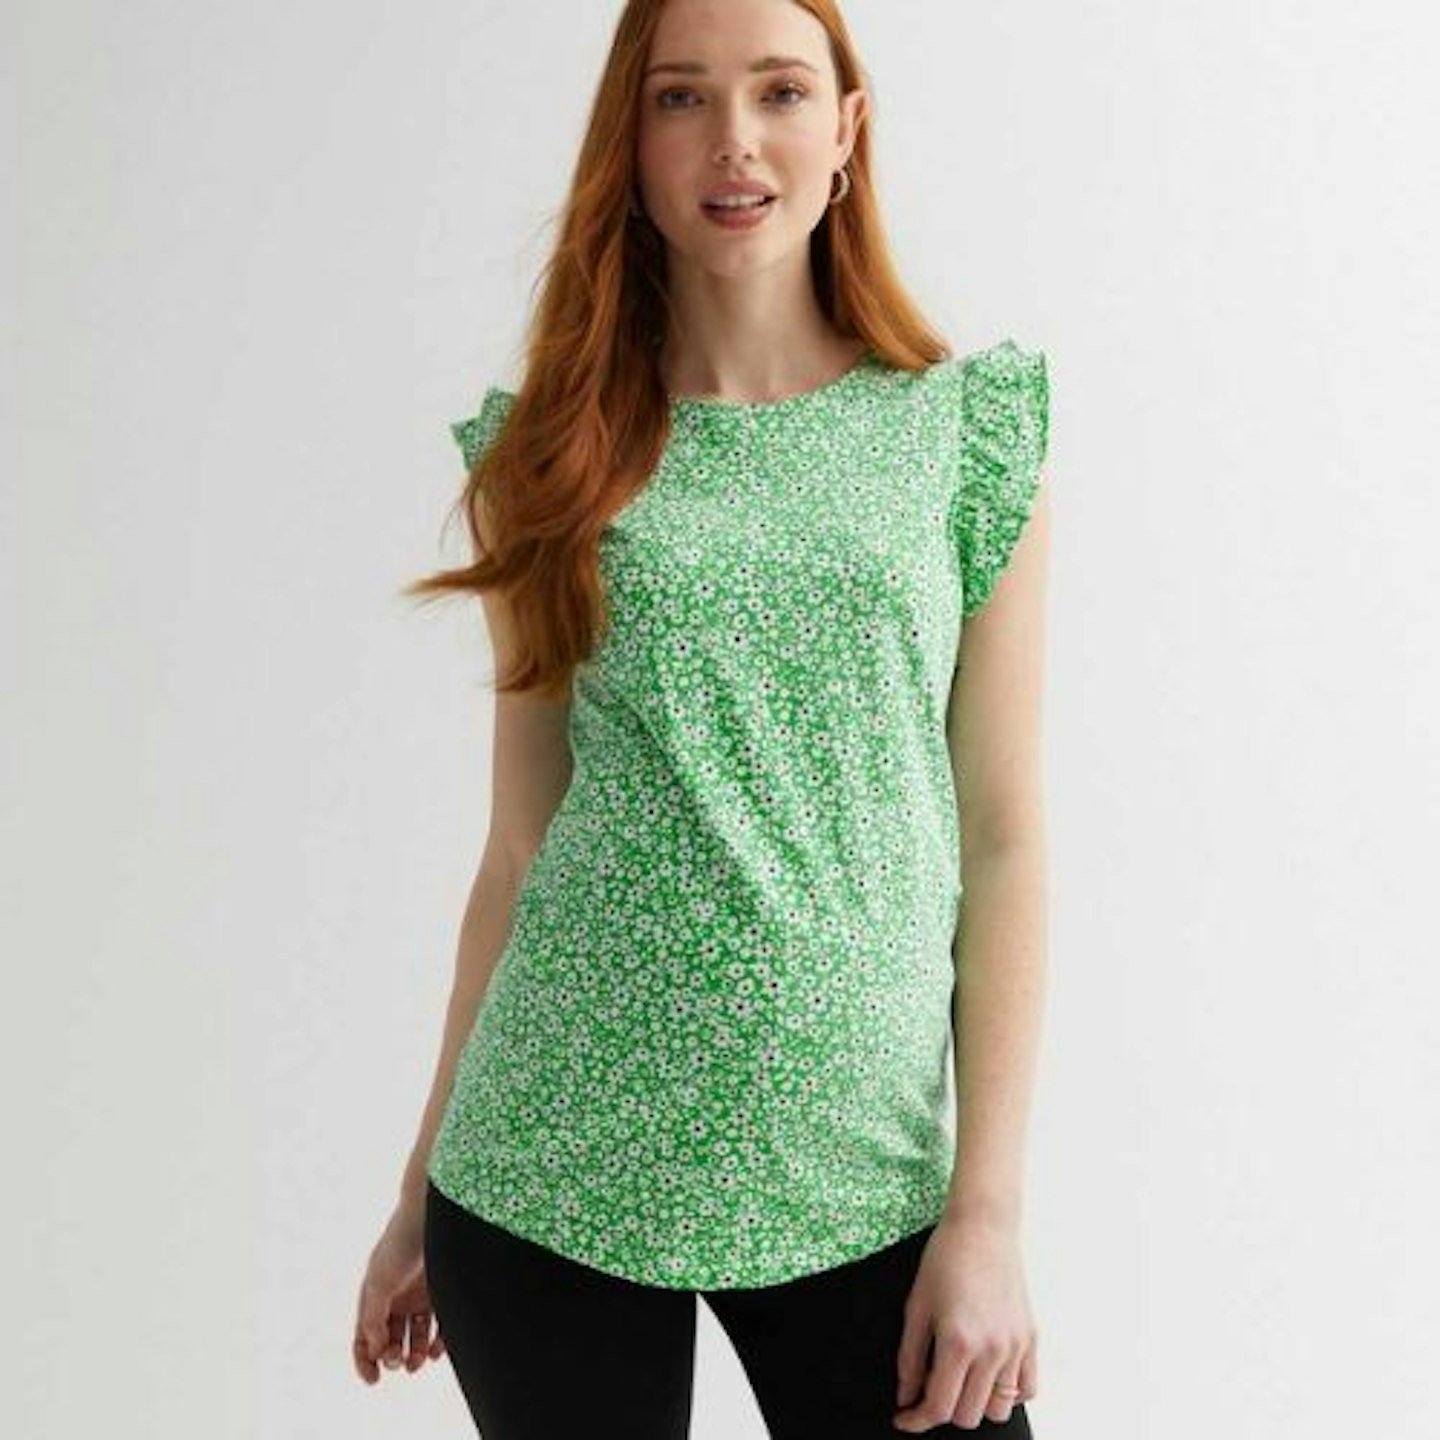 New Look Maternity Green Floral Frill Sleeve Top